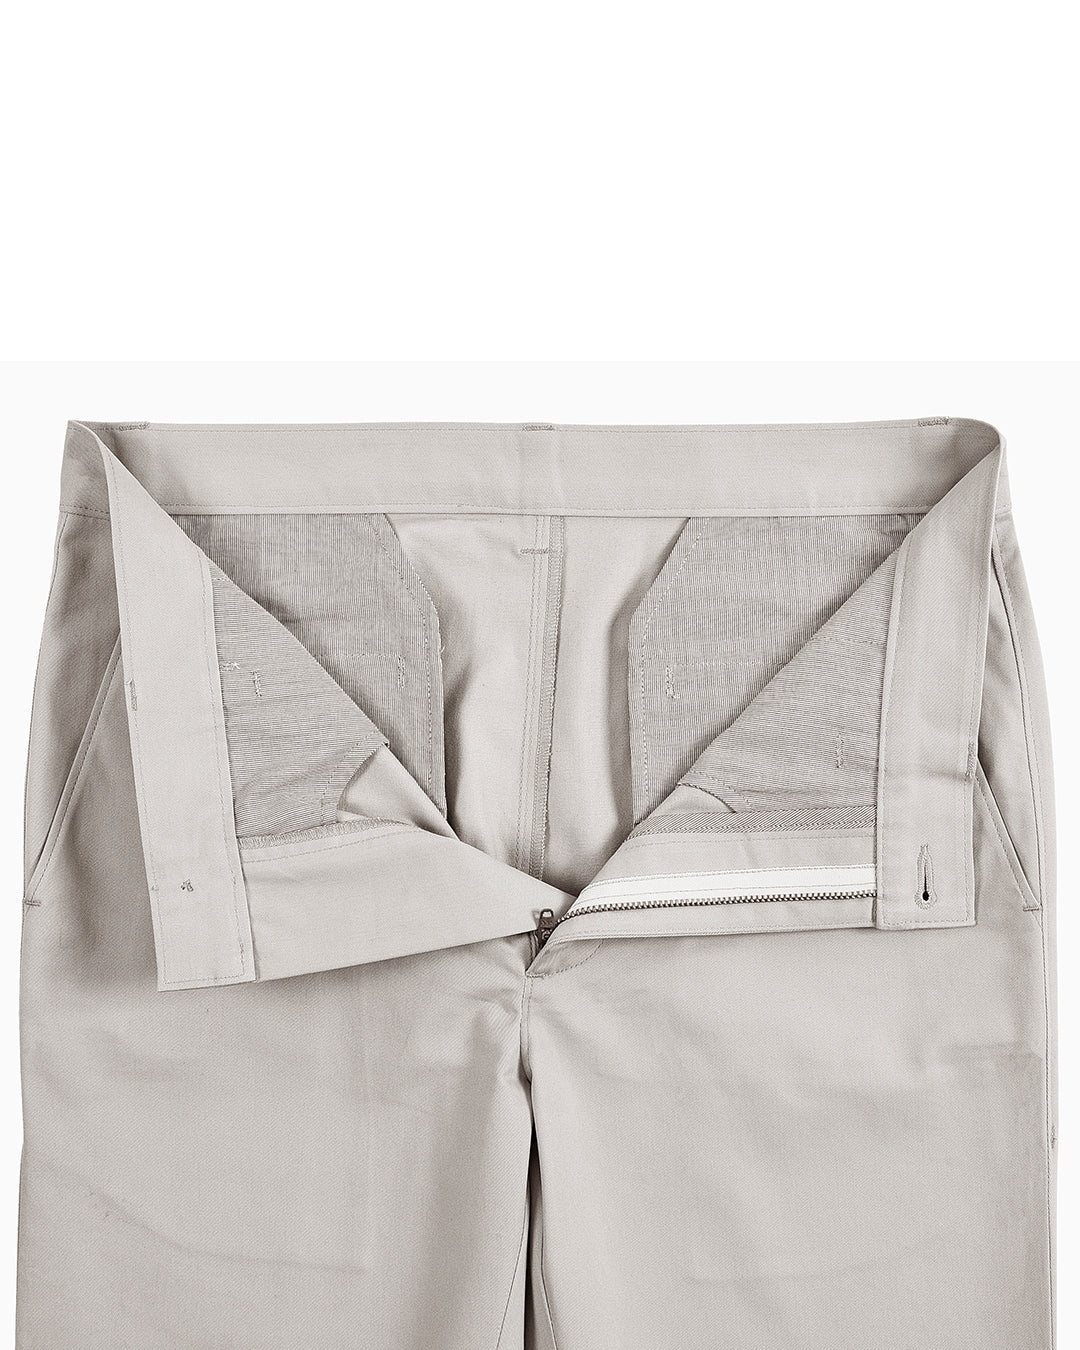 Front open view of custom Genoa Chino pants for men by Luxire in stone